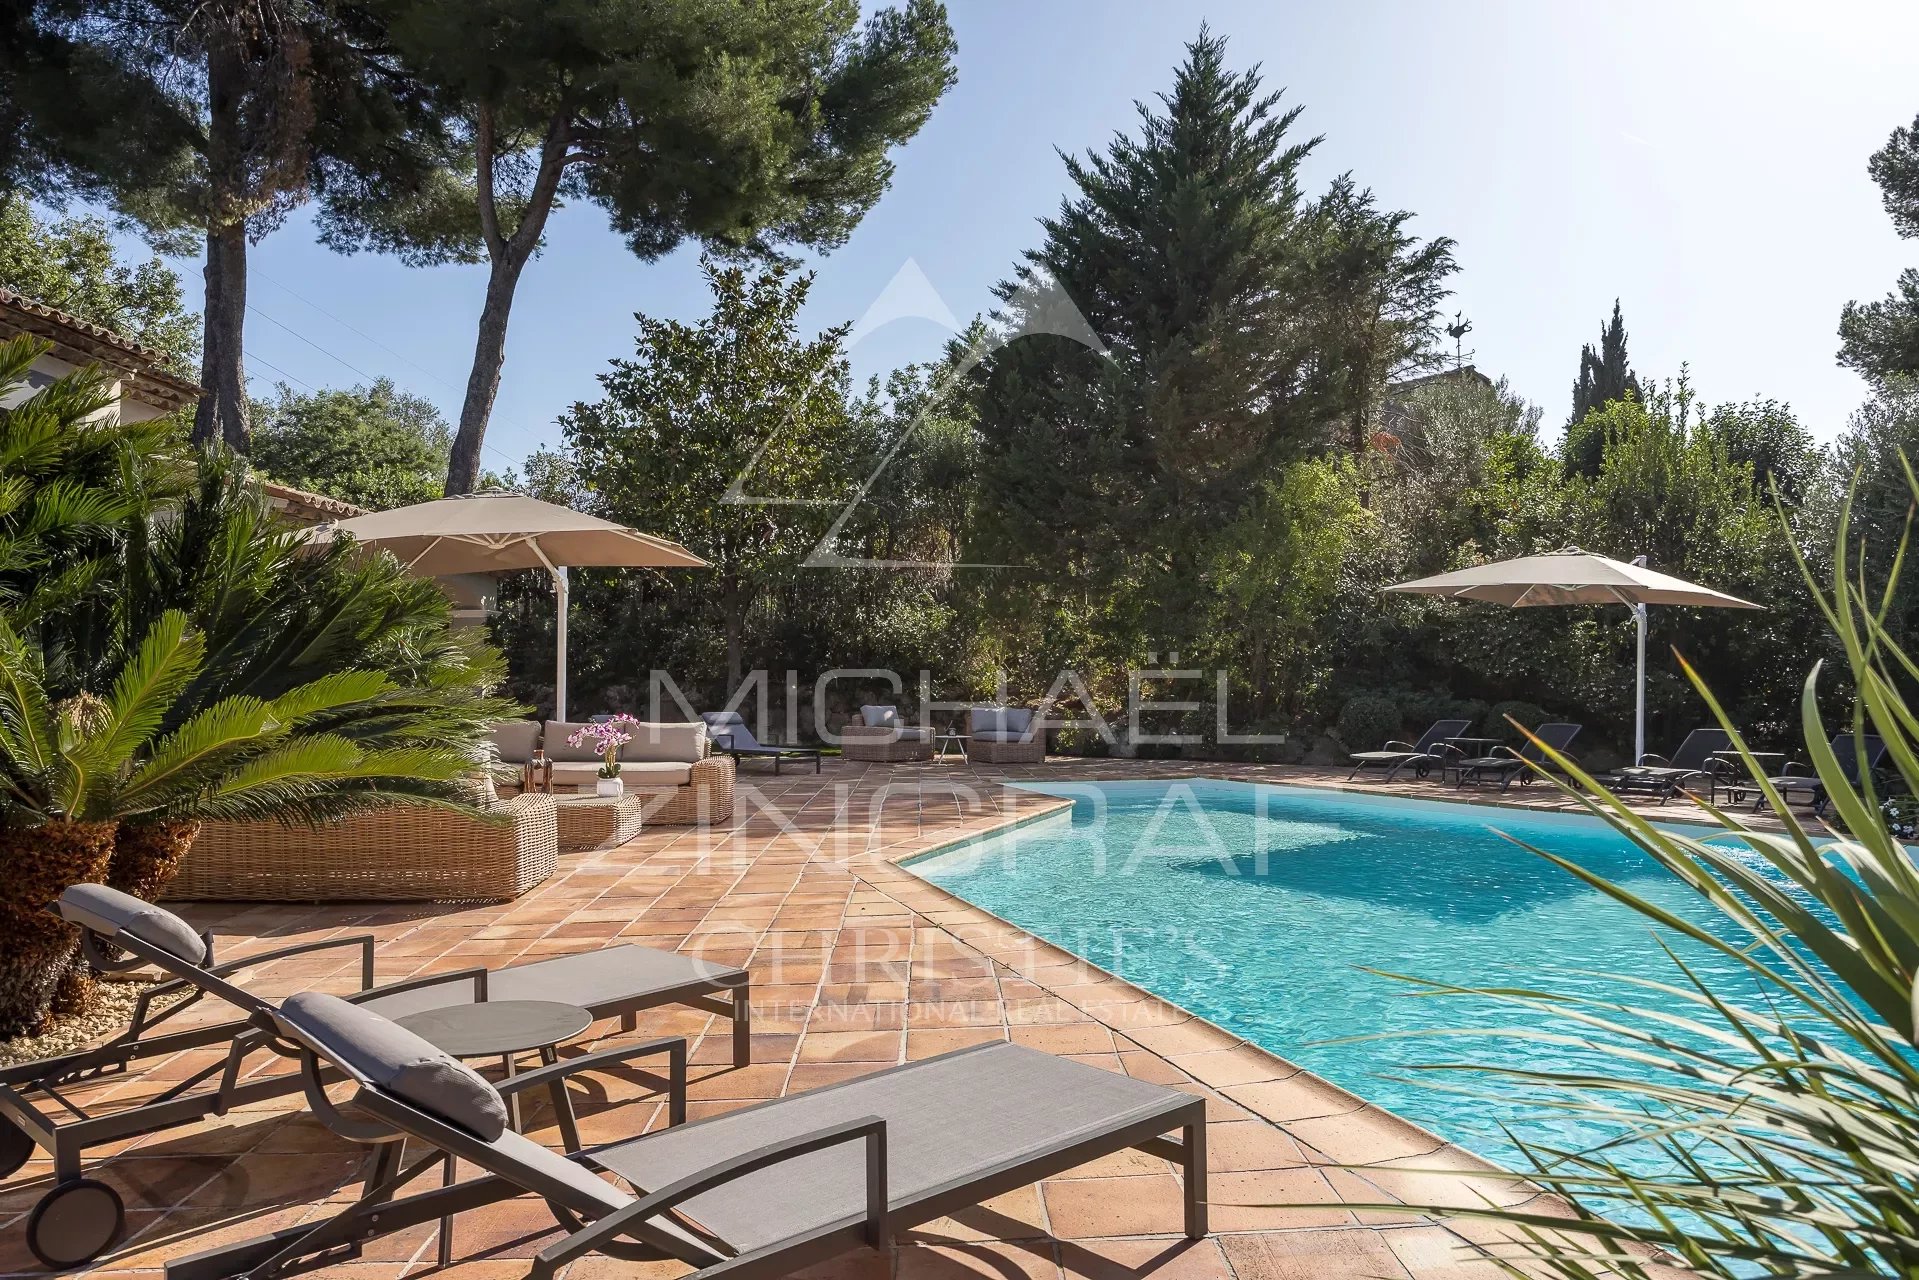 Gorgeous and renovated villa located in green and residential environment